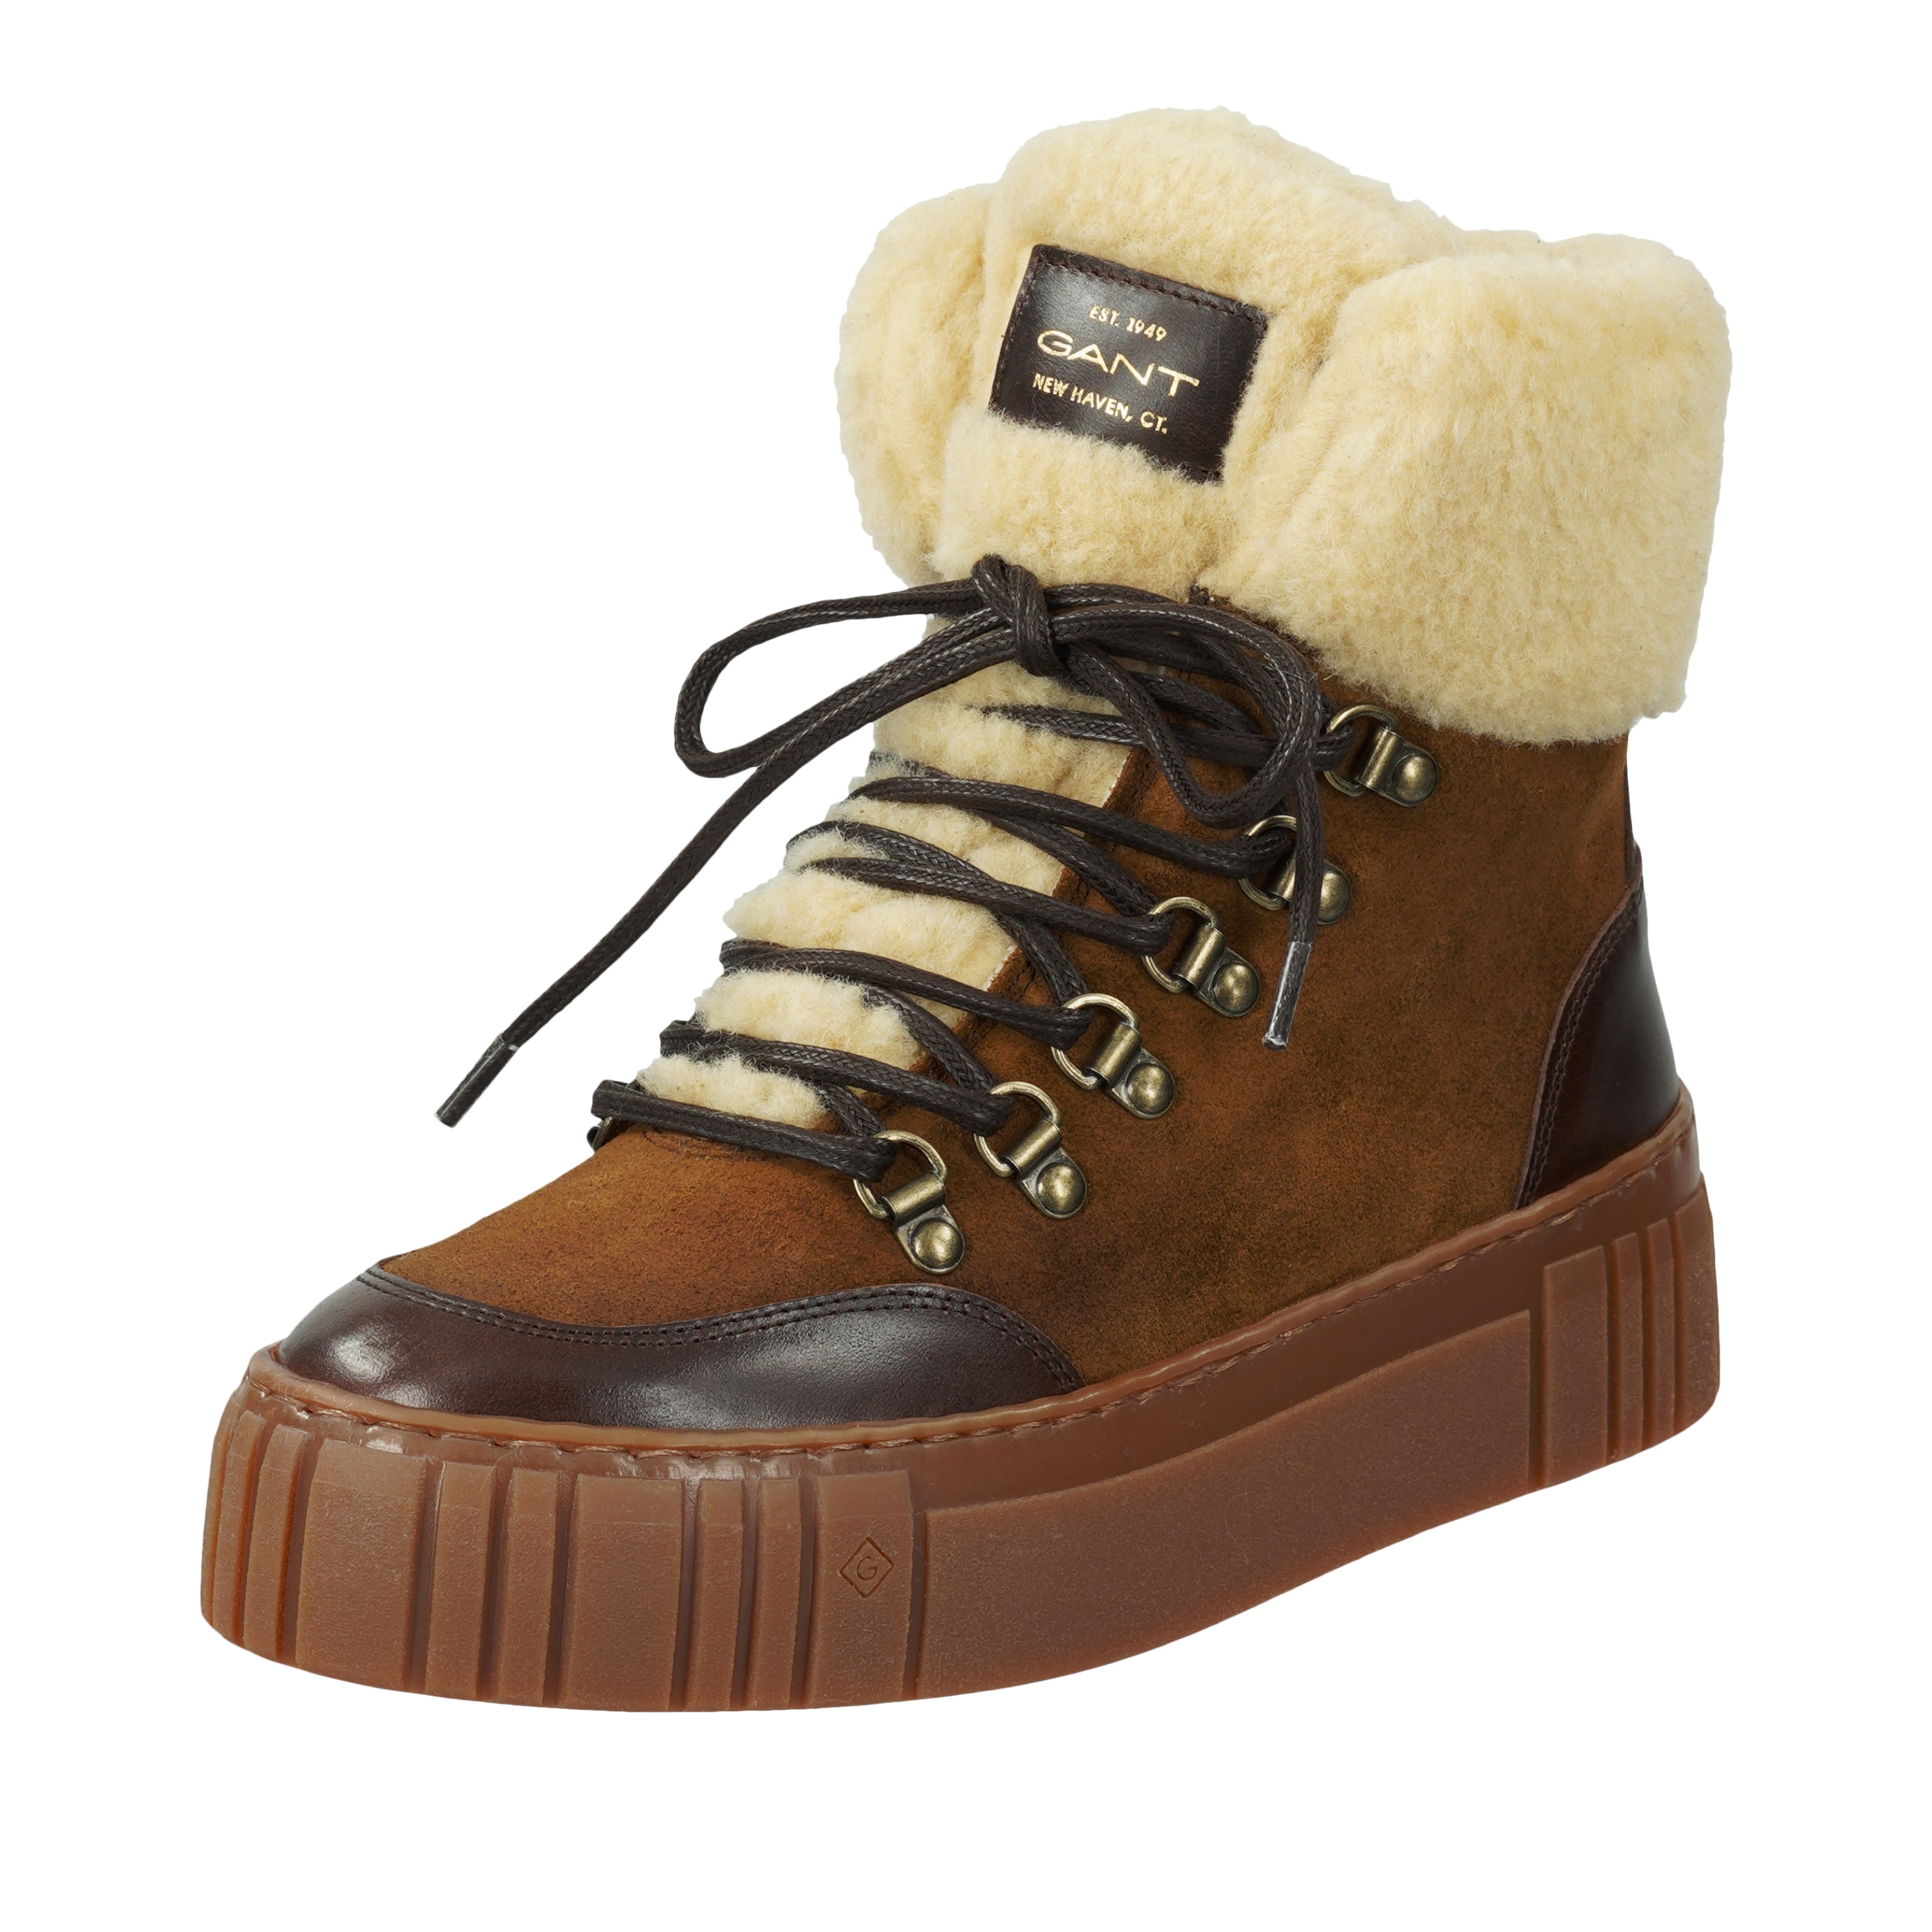 Snowmont - Brown suede leather